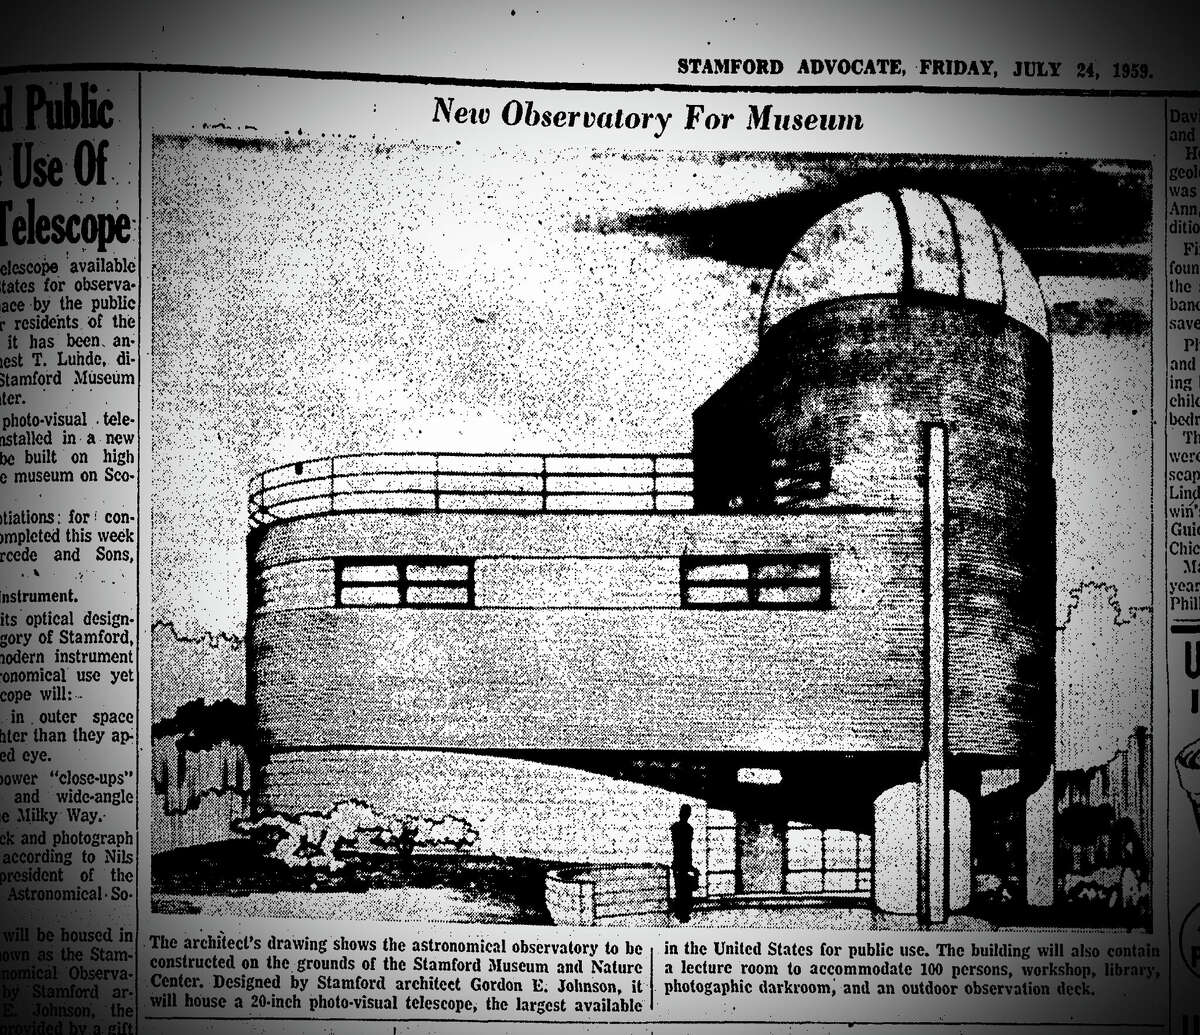 An architect's drawing of the planned Stamford Observatory in the Stamford Advocate in 1959.  